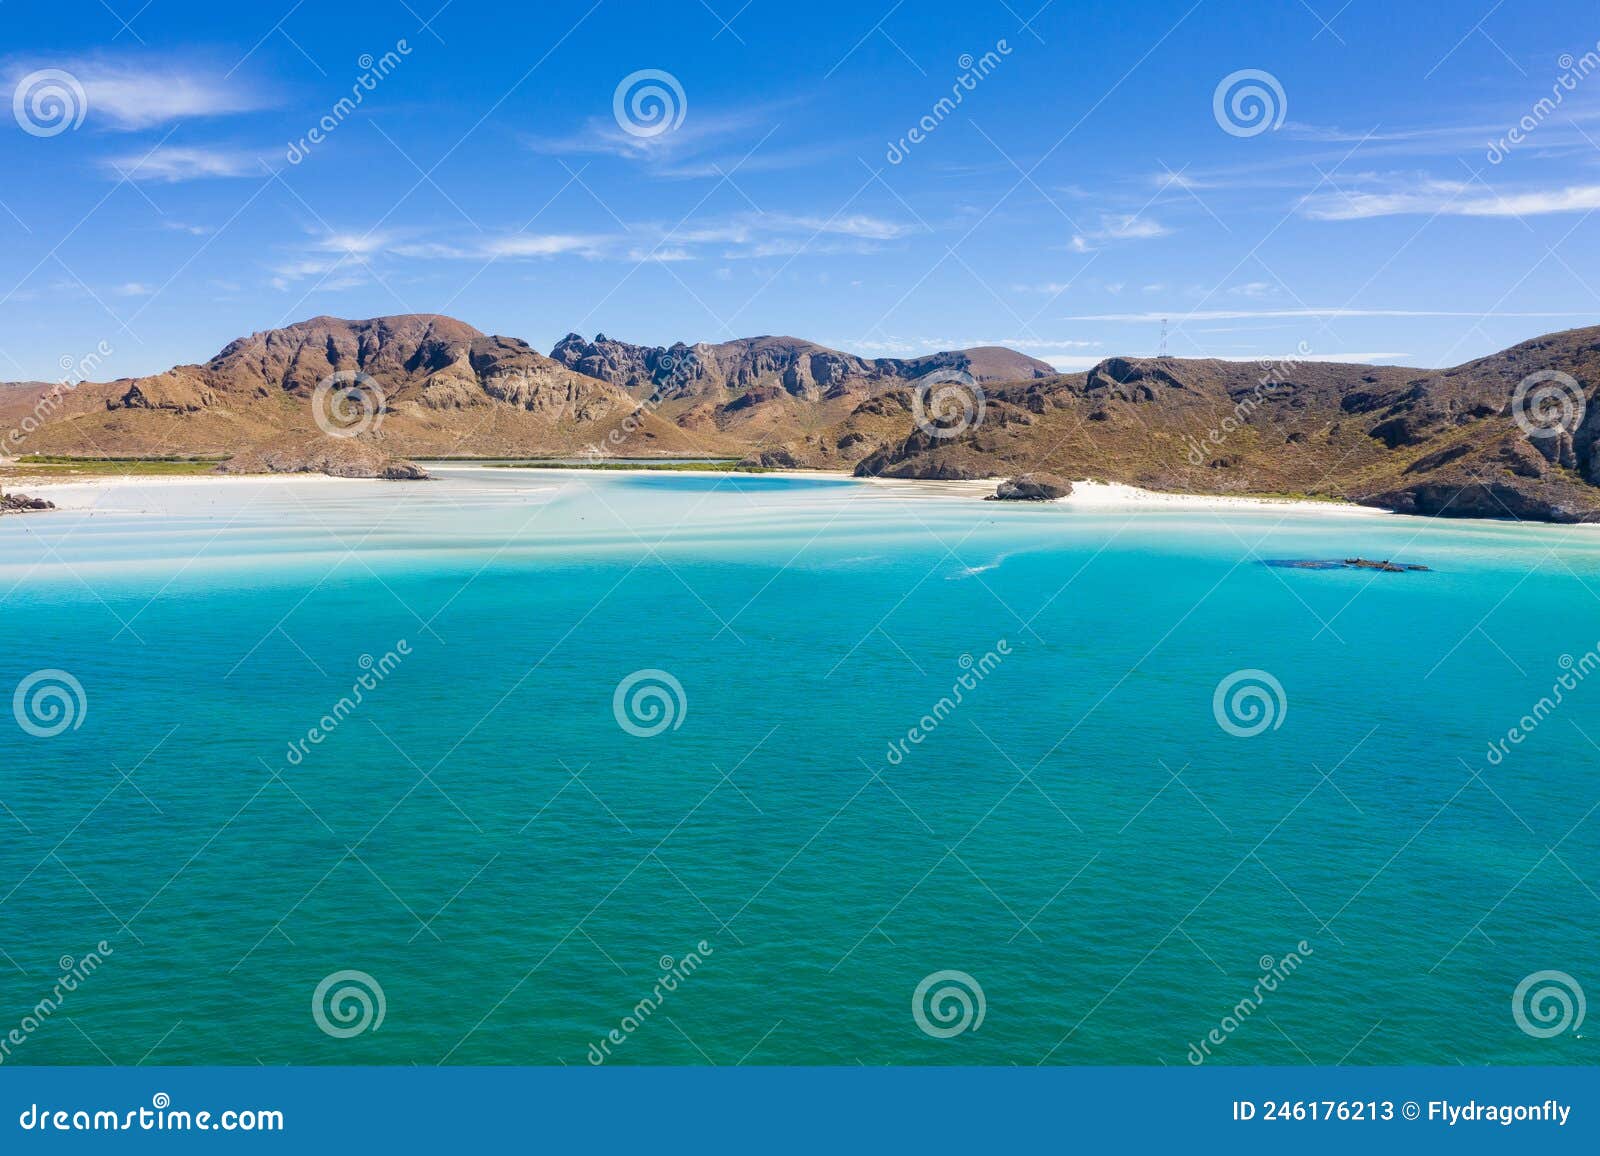 mexican paradise beach playa balandra ner la paz with white sand and blue water